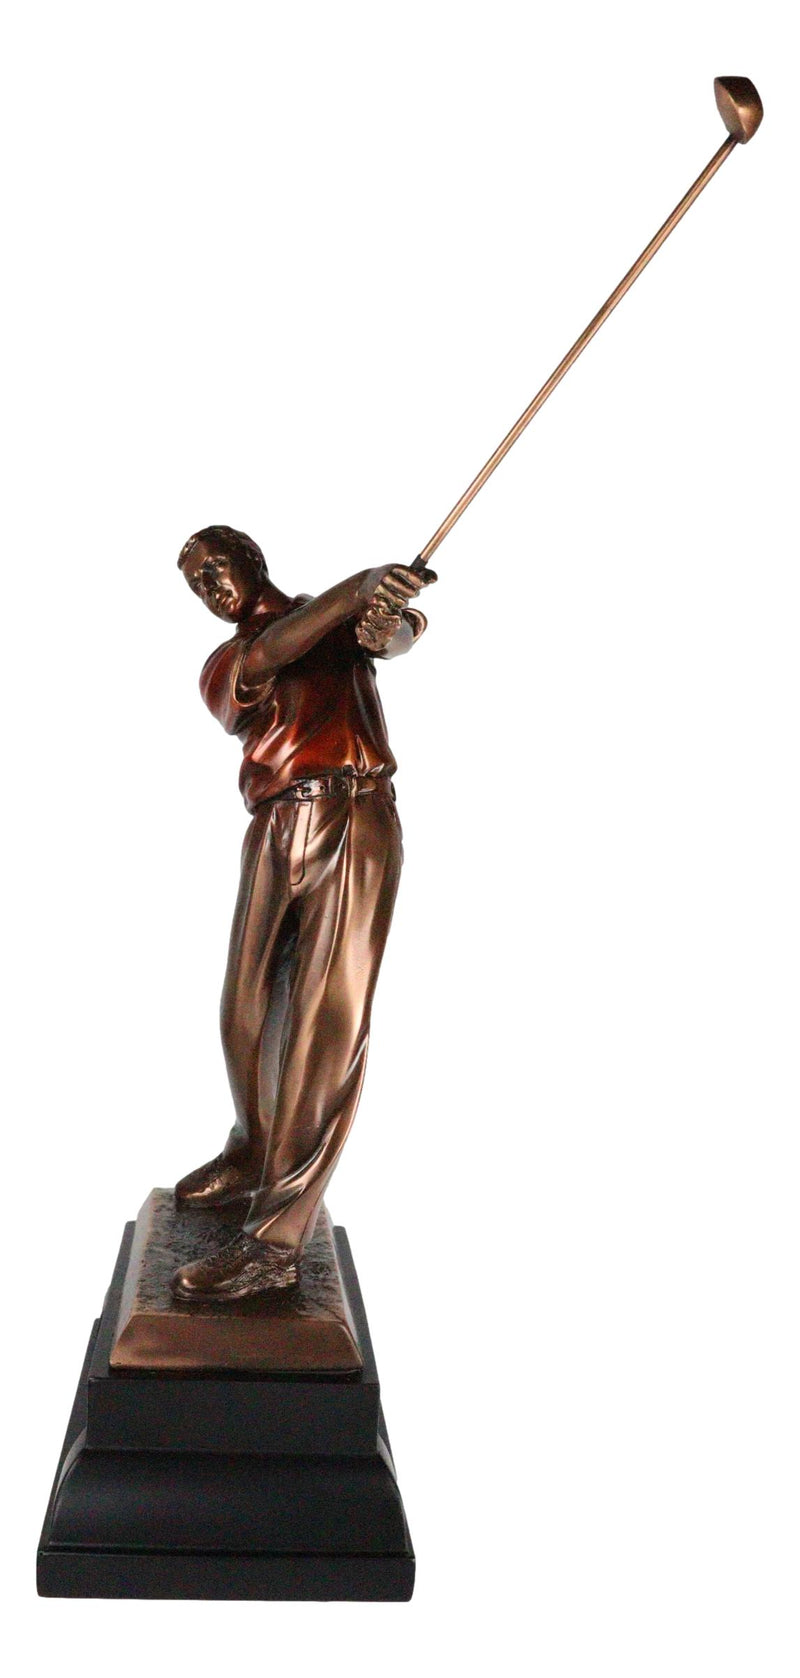 Pro Golfer Swinging Golf Club Bronze Electroplated Statue With Trophy Base 12" H